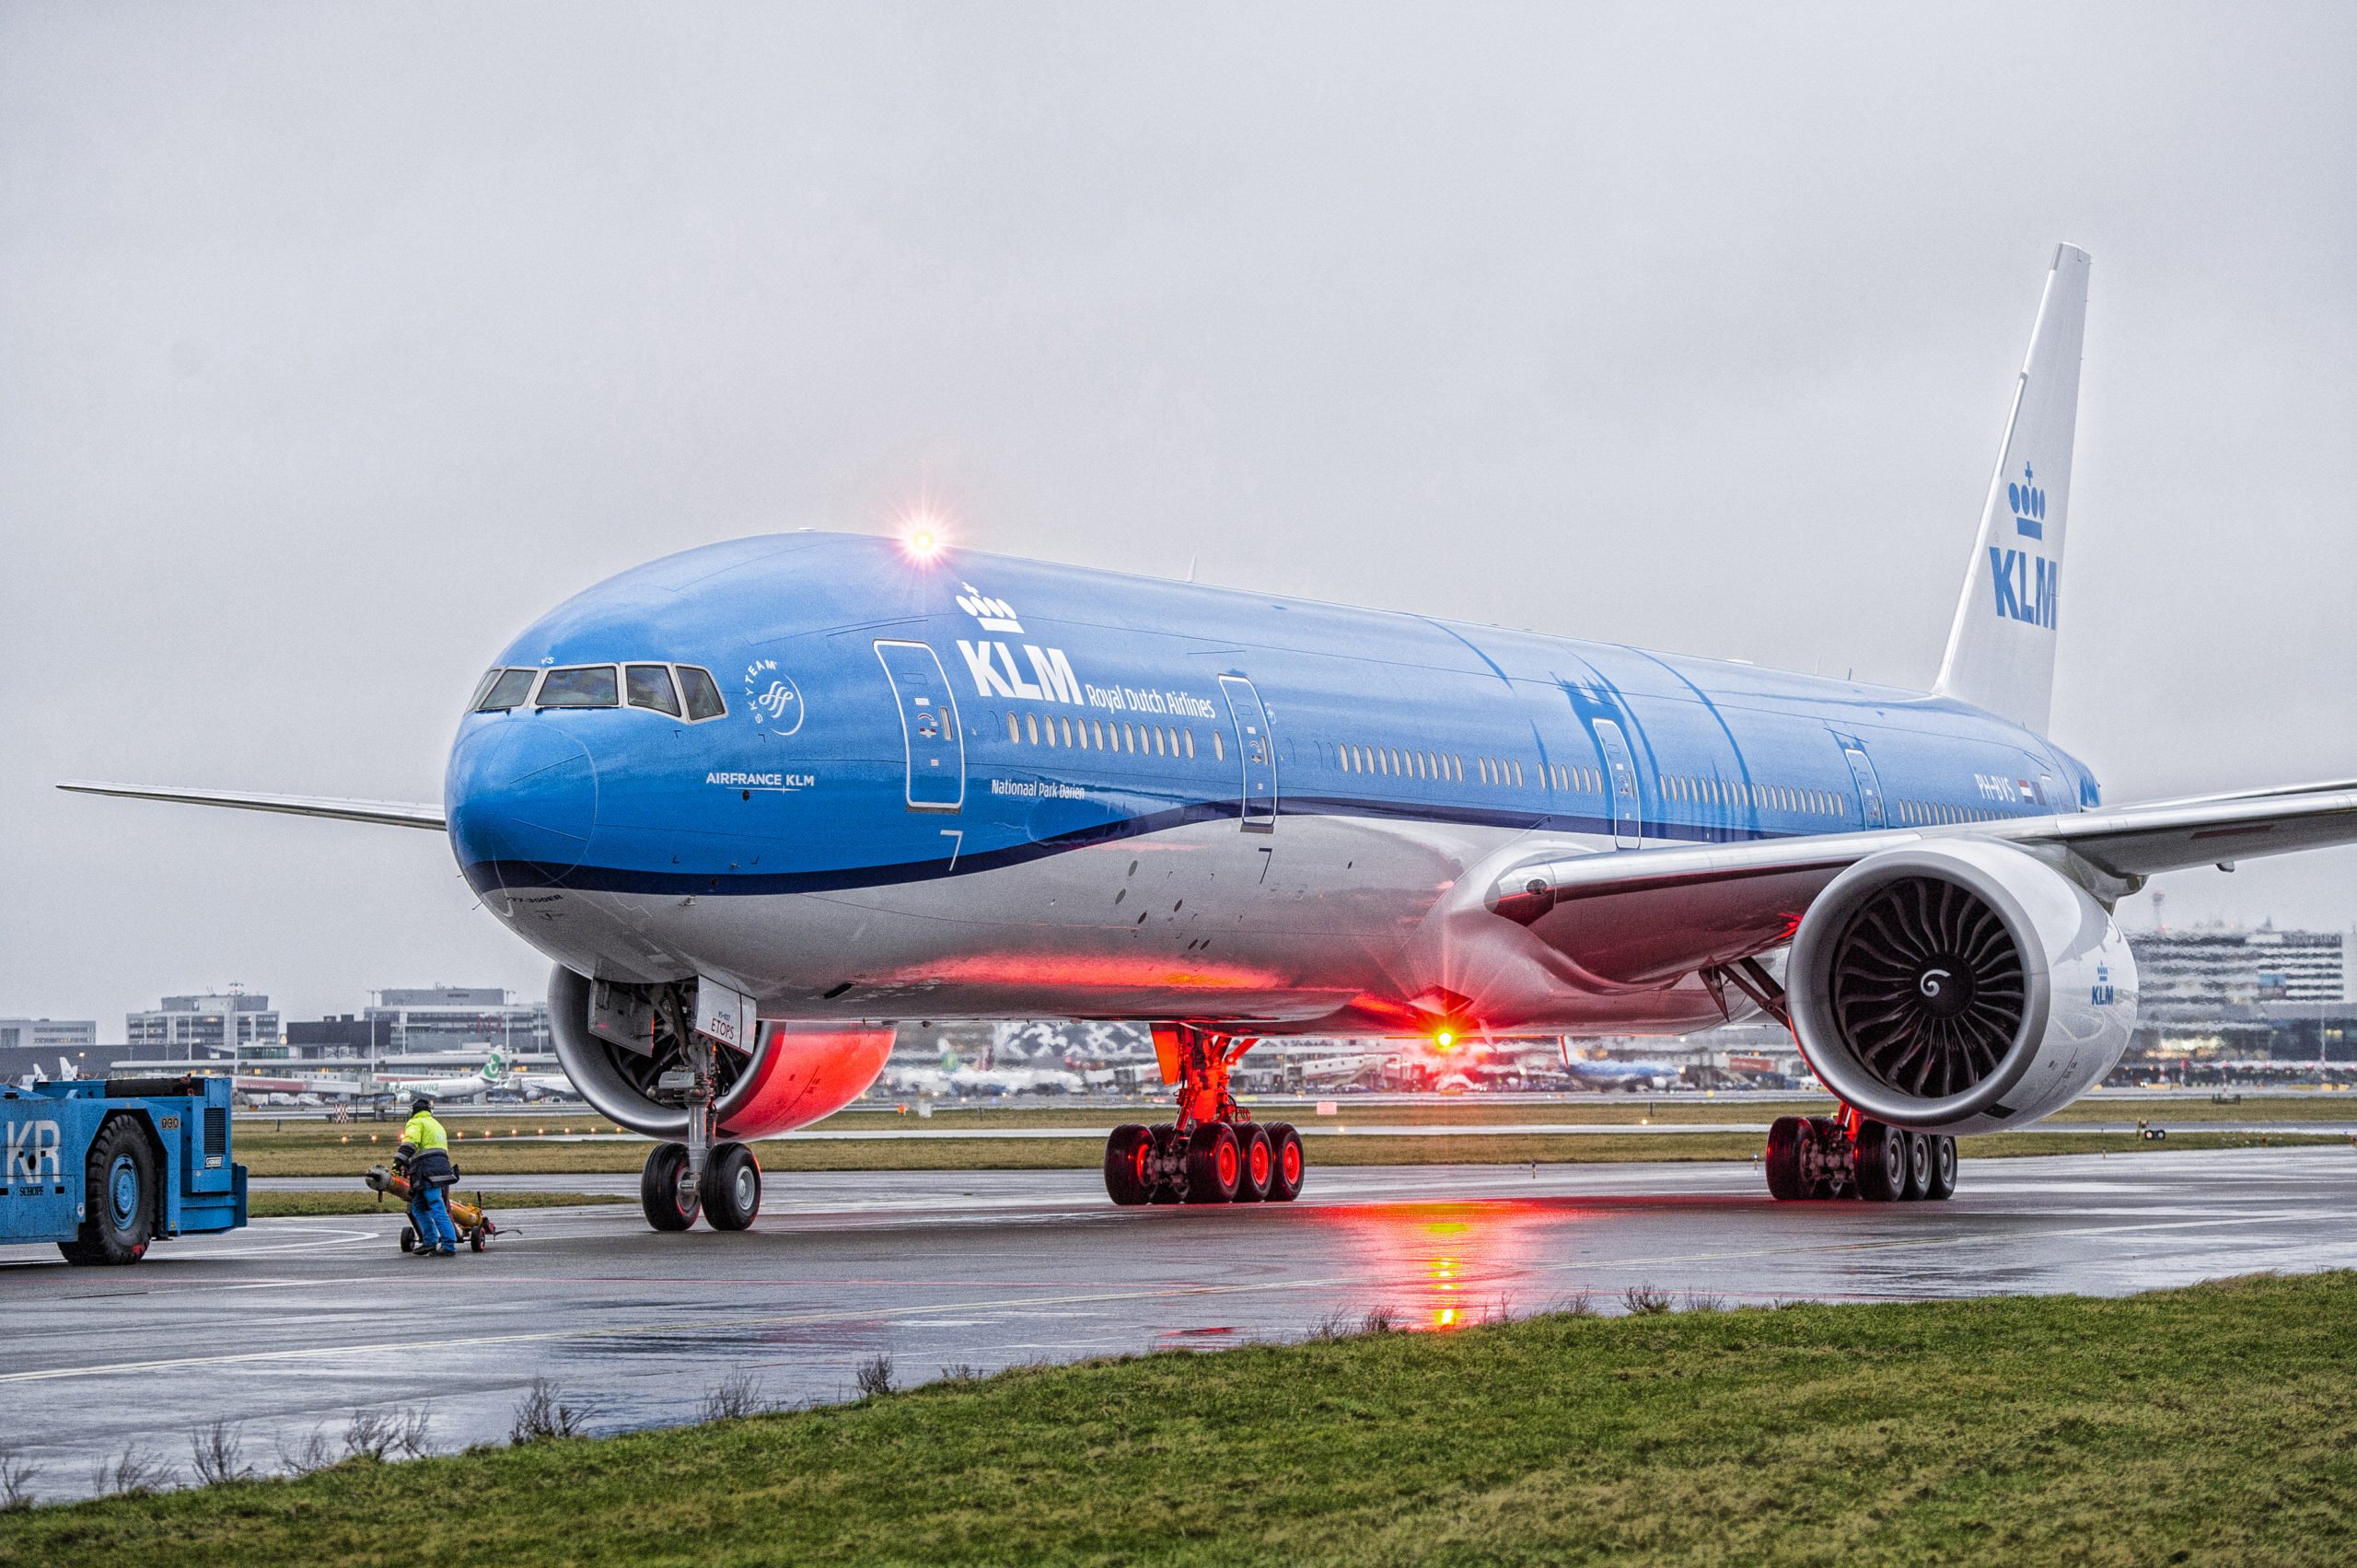 A KLM 777-300 arrives at Amsterdam Schiphol Airport. Photo courtesy of KLM.